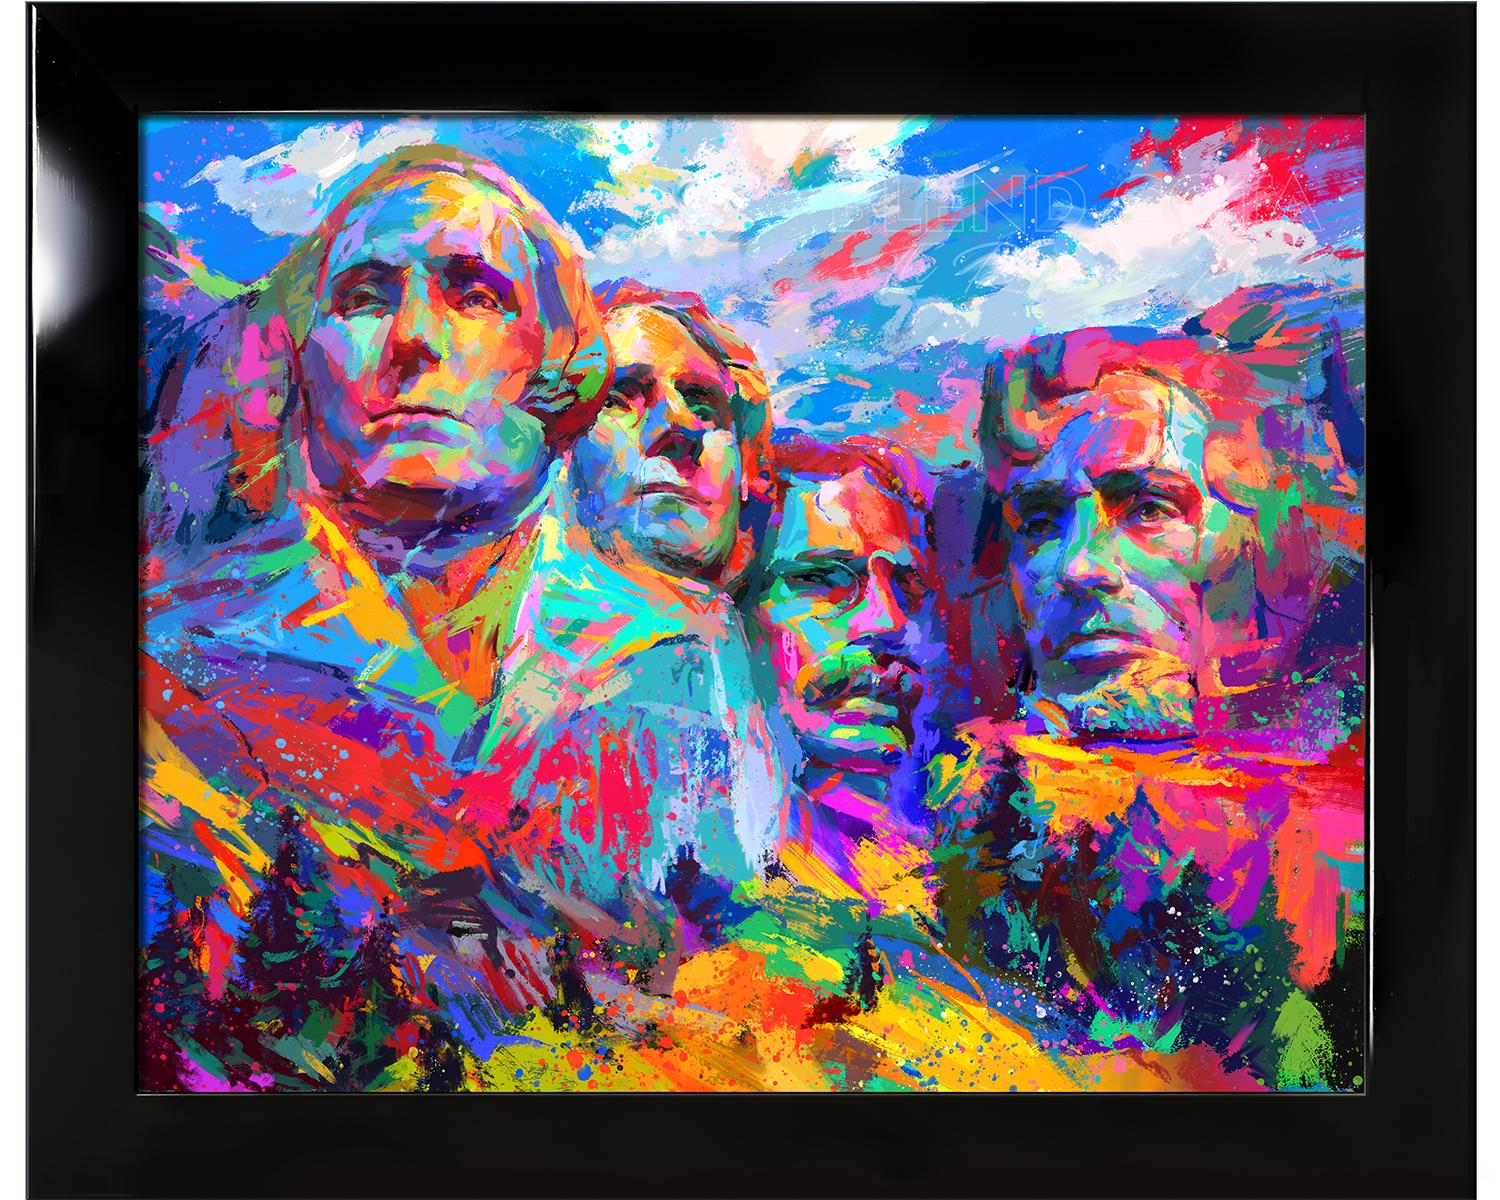 Mount Rushmore - Oil on canvas painting